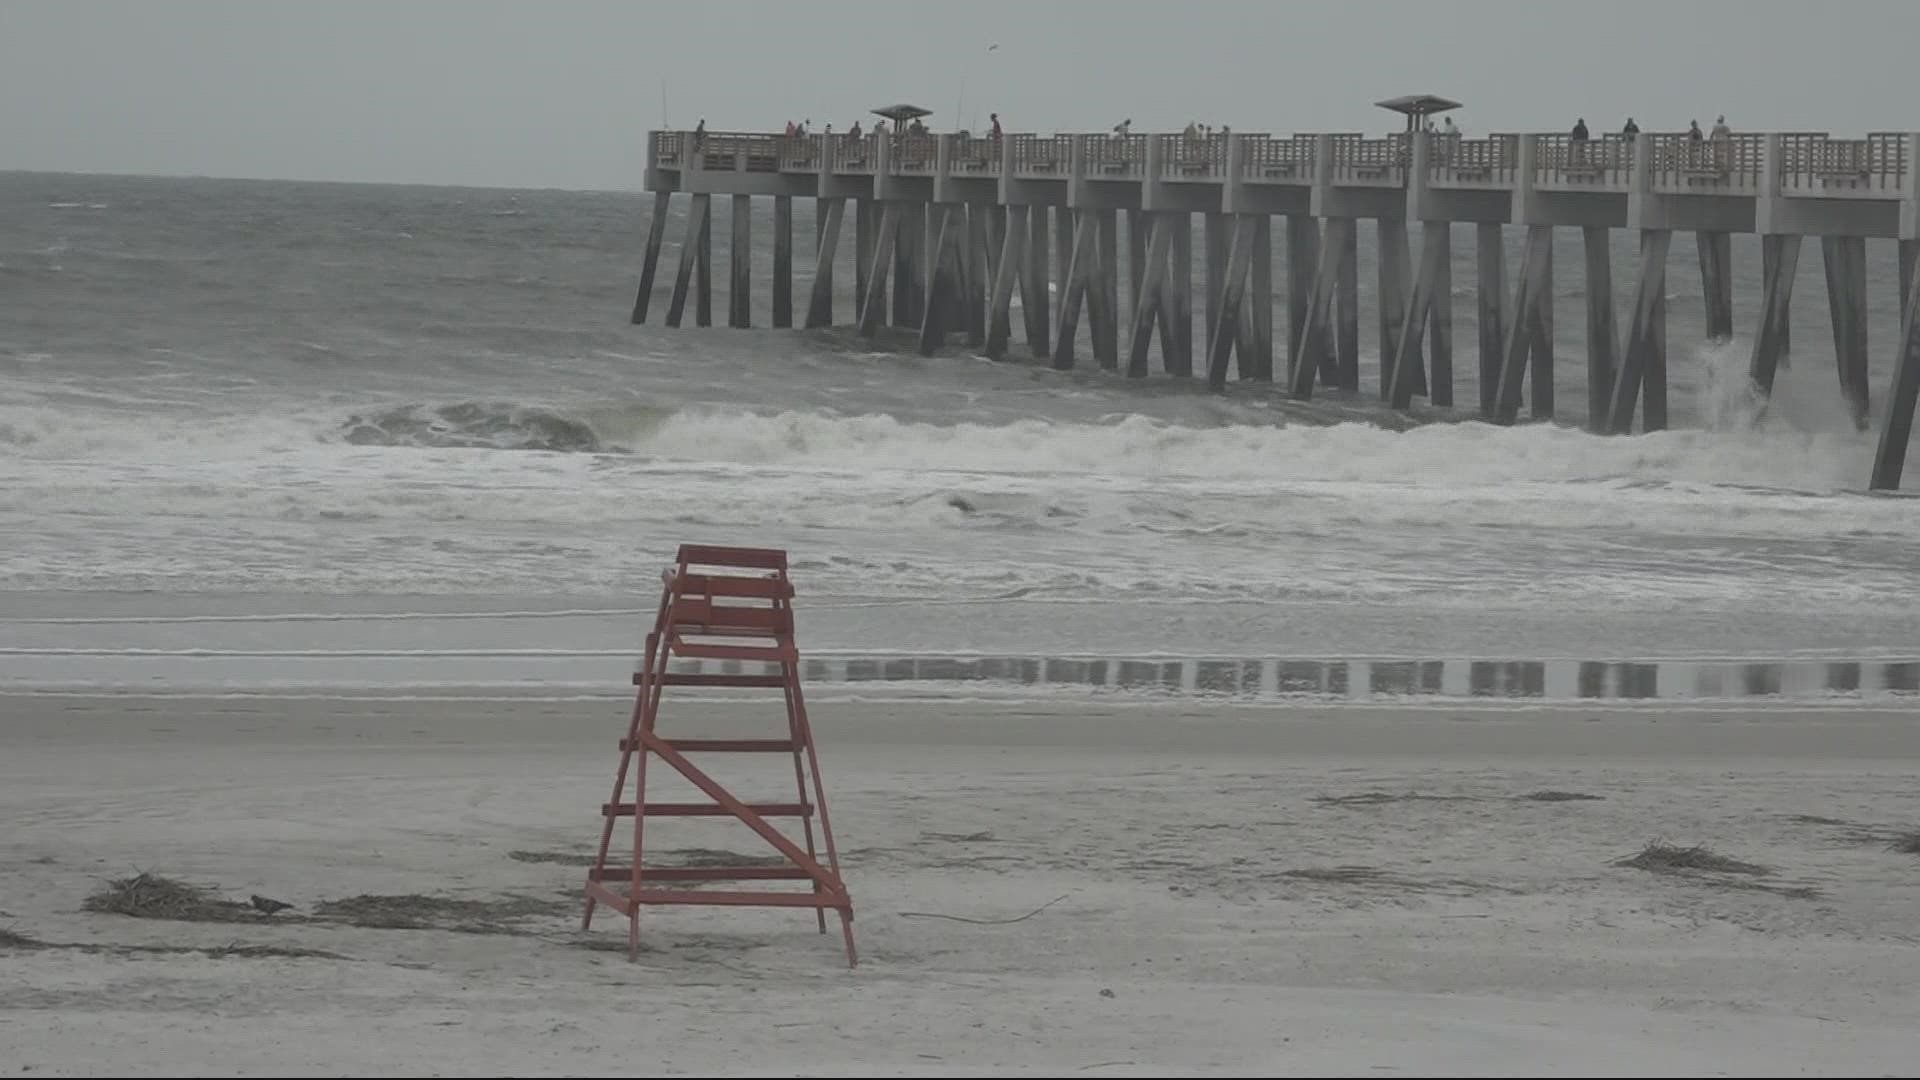 Hurricane Fiona is creating big waves and rip currents along our First Coast.